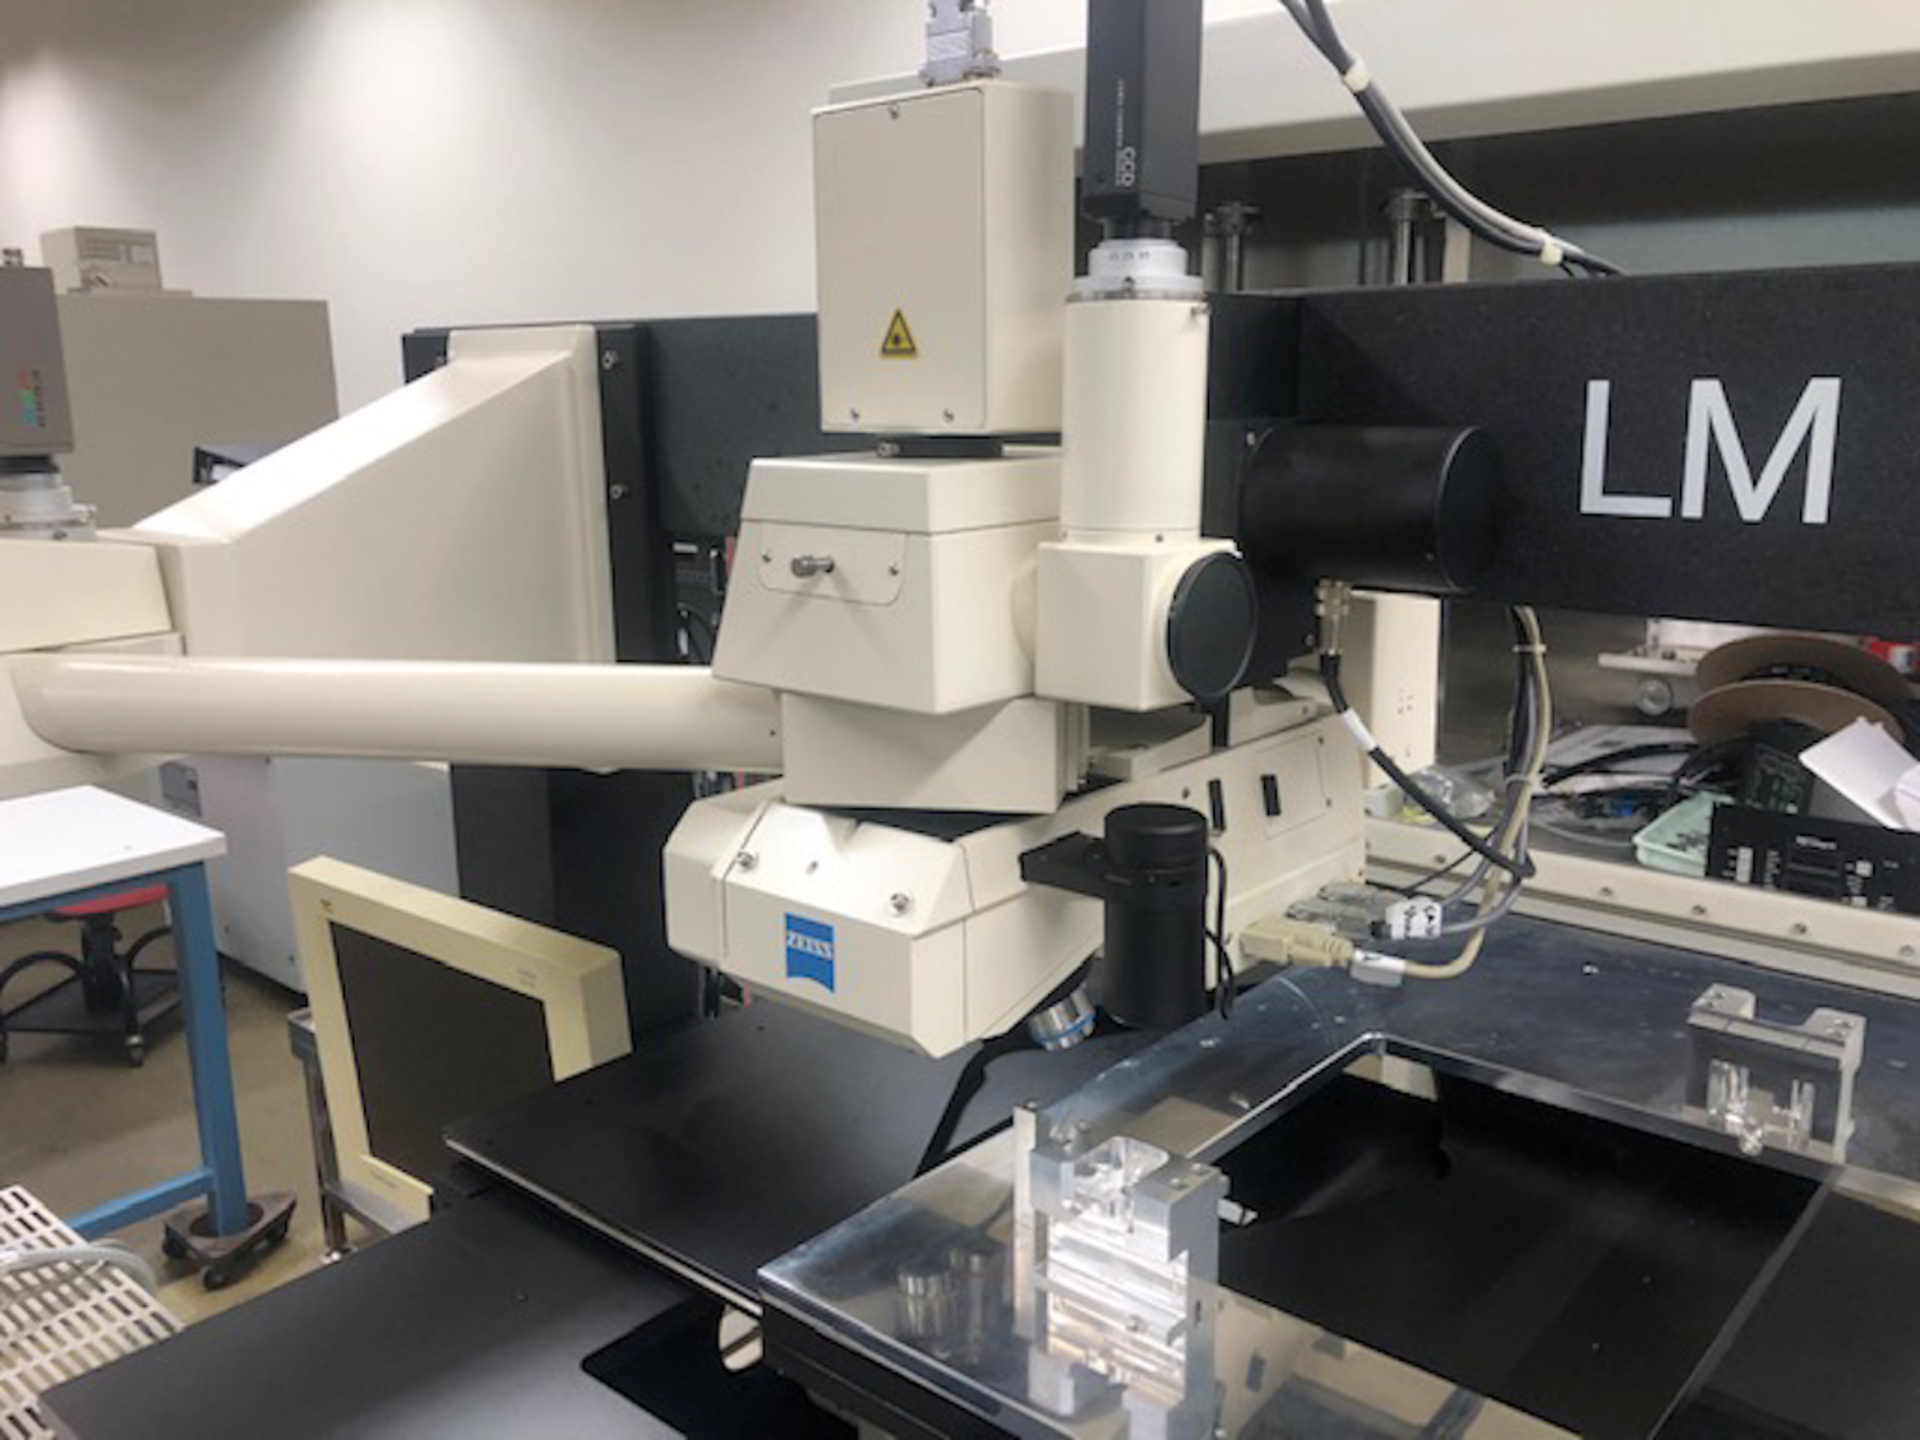 Zeiss large substrate inspection microscope - Located at 33 Great Oaks Blvd. San Jose, CA 95119 - Image 2 of 3